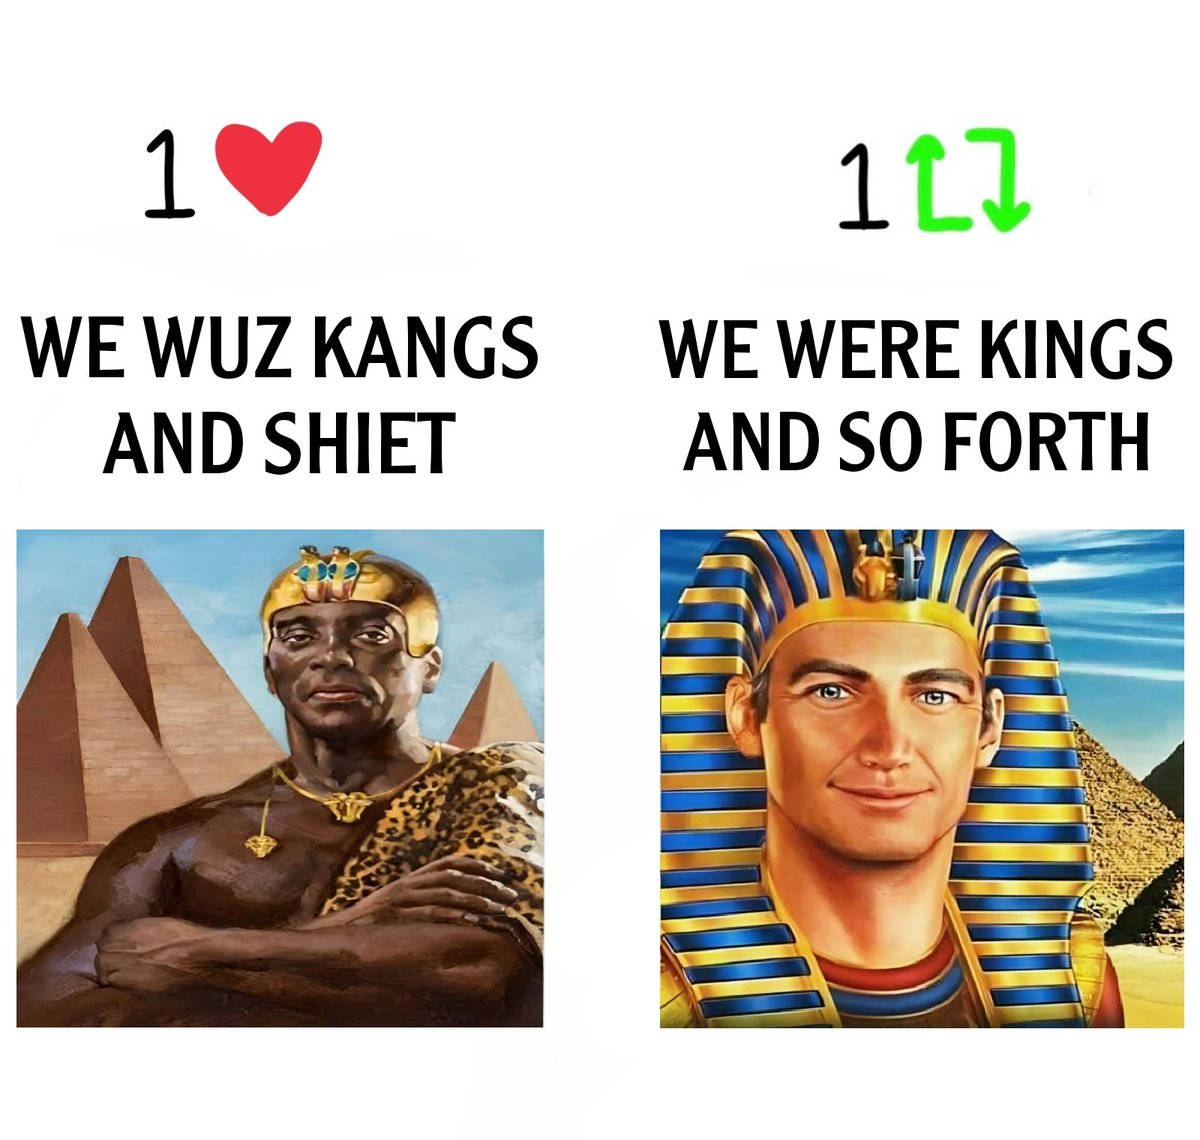 Alright time to settle this Who were the REAL ancient Egyptians?